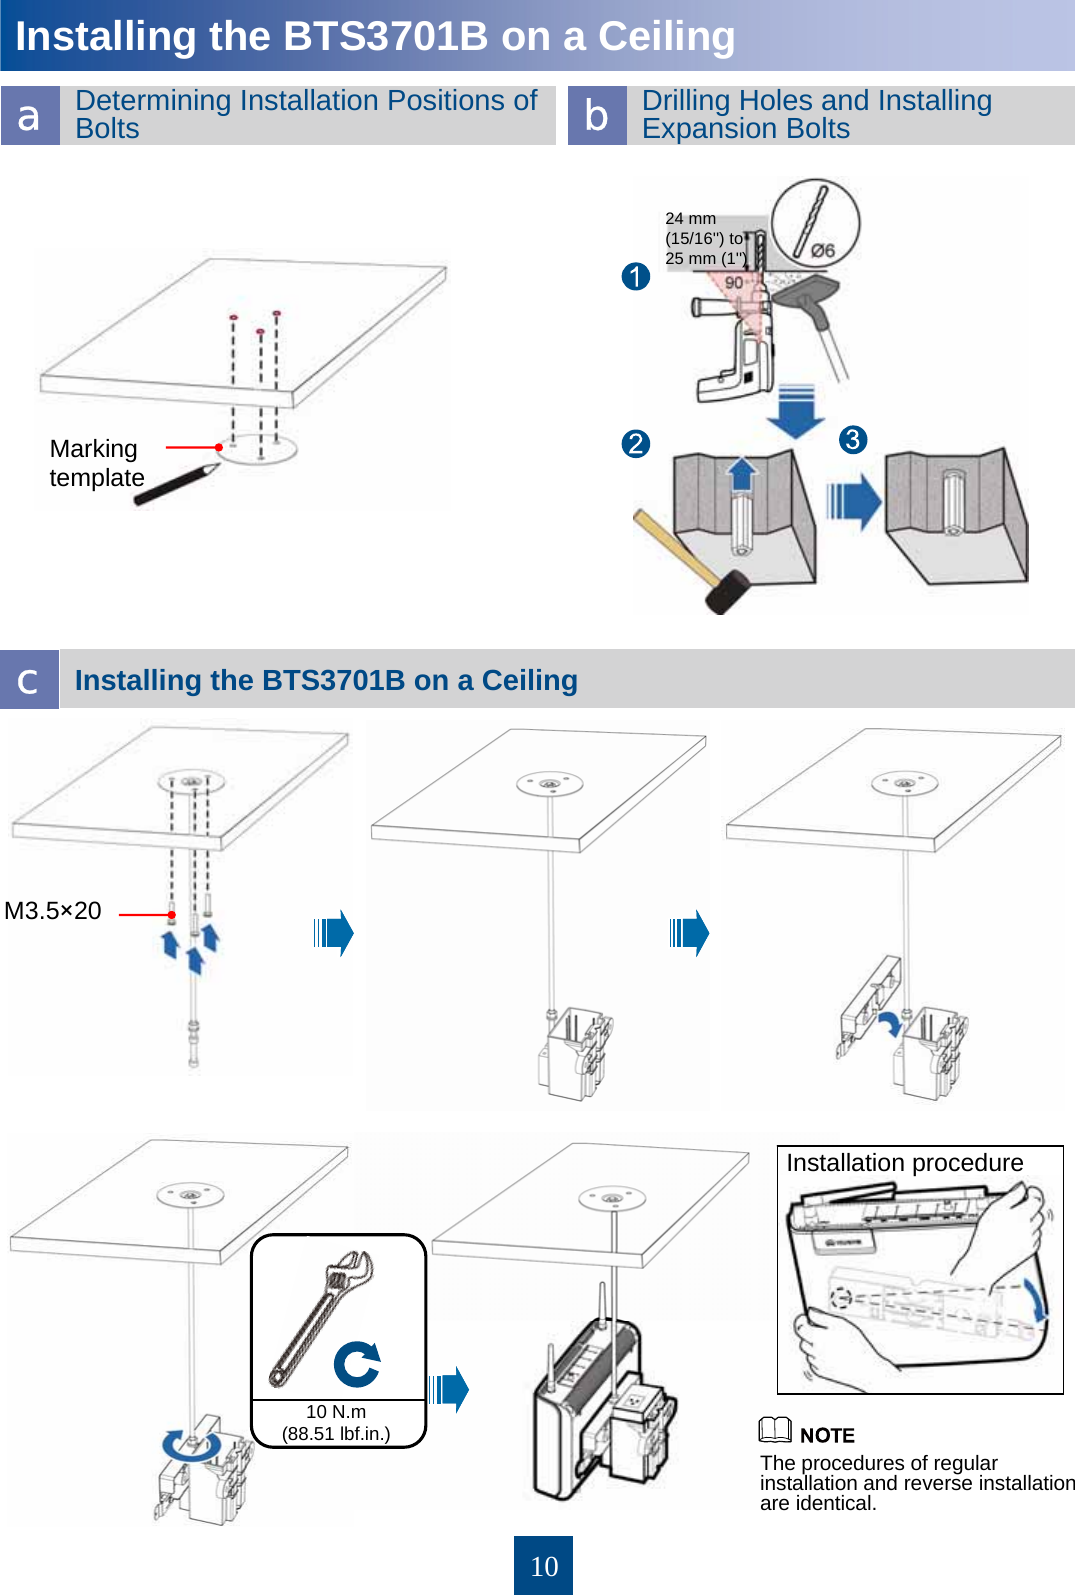 10Installing the BTS3701B on a CeilingInstalling the BTS3701B on a Ceiling aDetermining Installation Positions of Bolts  bDrilling Holes and Installing Expansion Bolts cThe procedures of regular installation and reverse installation are identical. Installation procedure M3.5×20Marking template 24 mm (15/16&apos;&apos;) to 25 mm (1&apos;&apos;)10 N.m (88.51 lbf.in.)